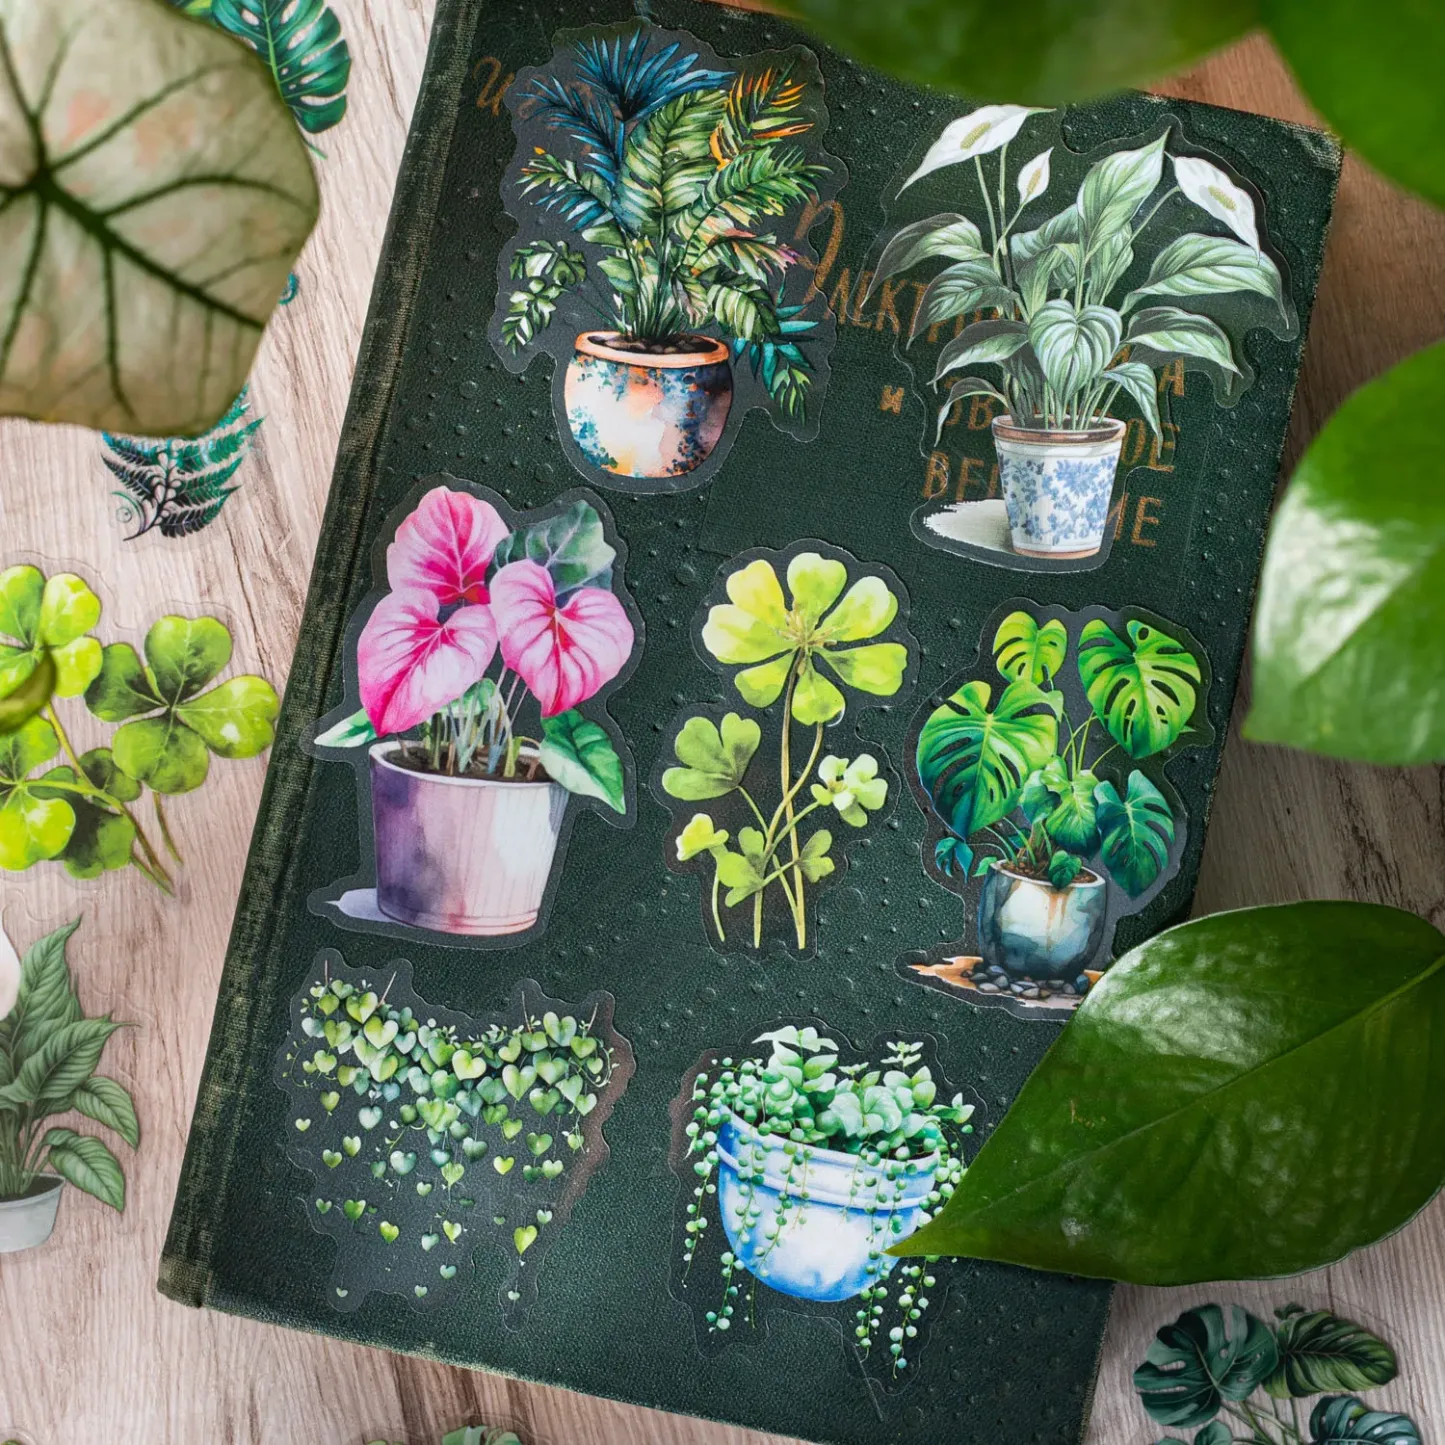 30 pieces/pack potted plant theme for journal planner, junk journal, decoration scrapbooking, DIY craft stickers